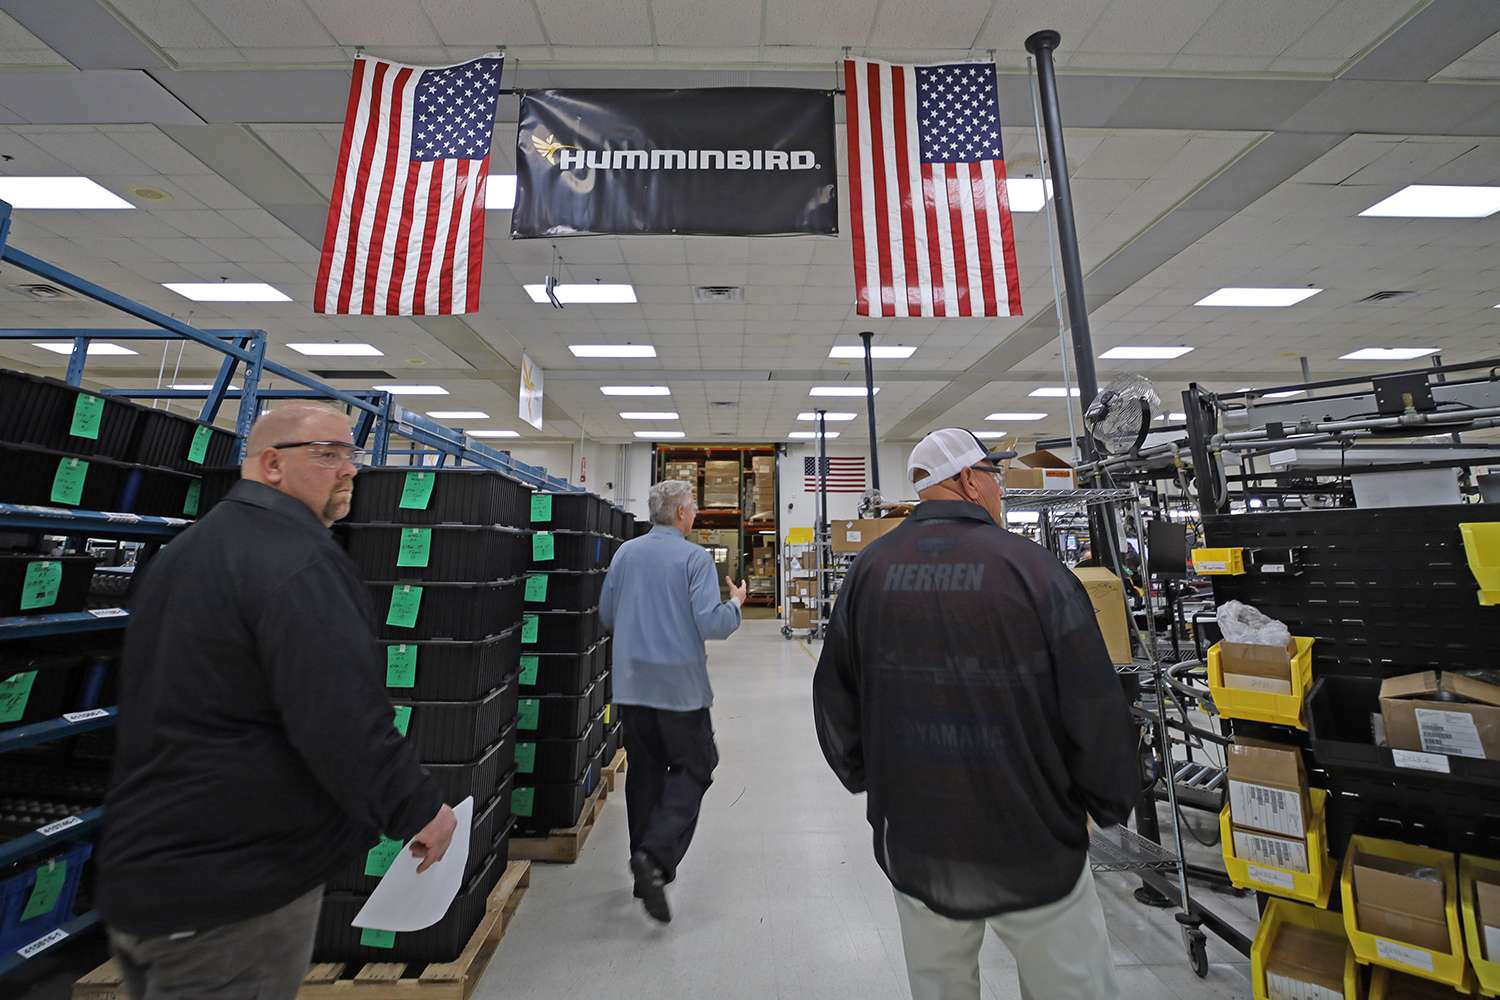 The team enters the production floor for a full-on tour of how Humminbird gets things done. 